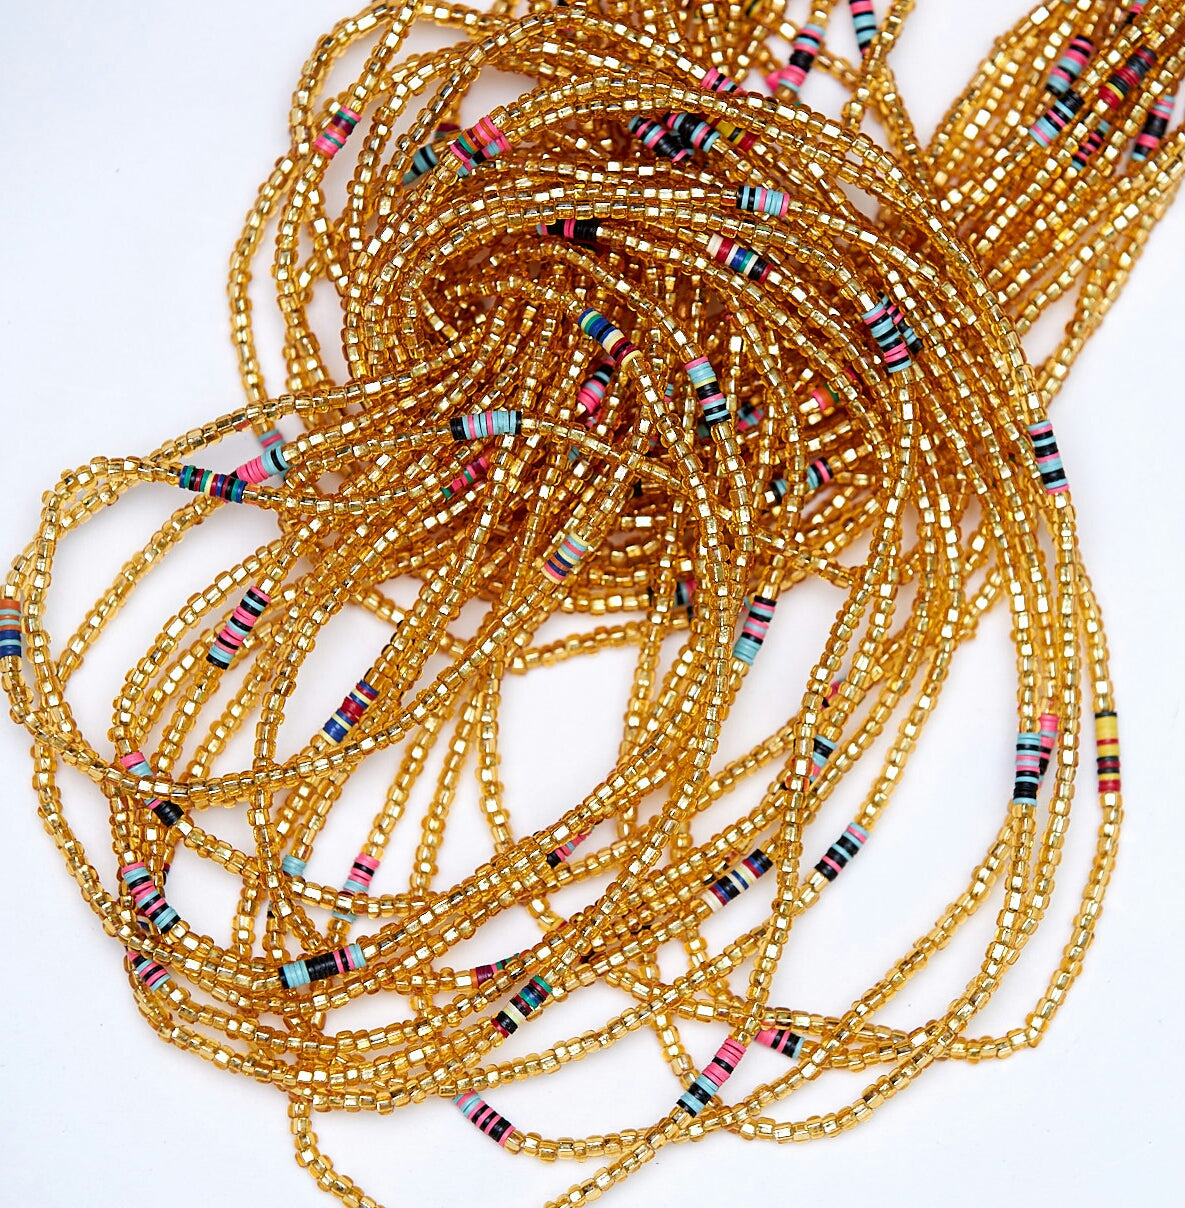 45 inches Shiny Gold Glass Beads With Round Pink, Black , Sea blue Bars Tie On waist beads